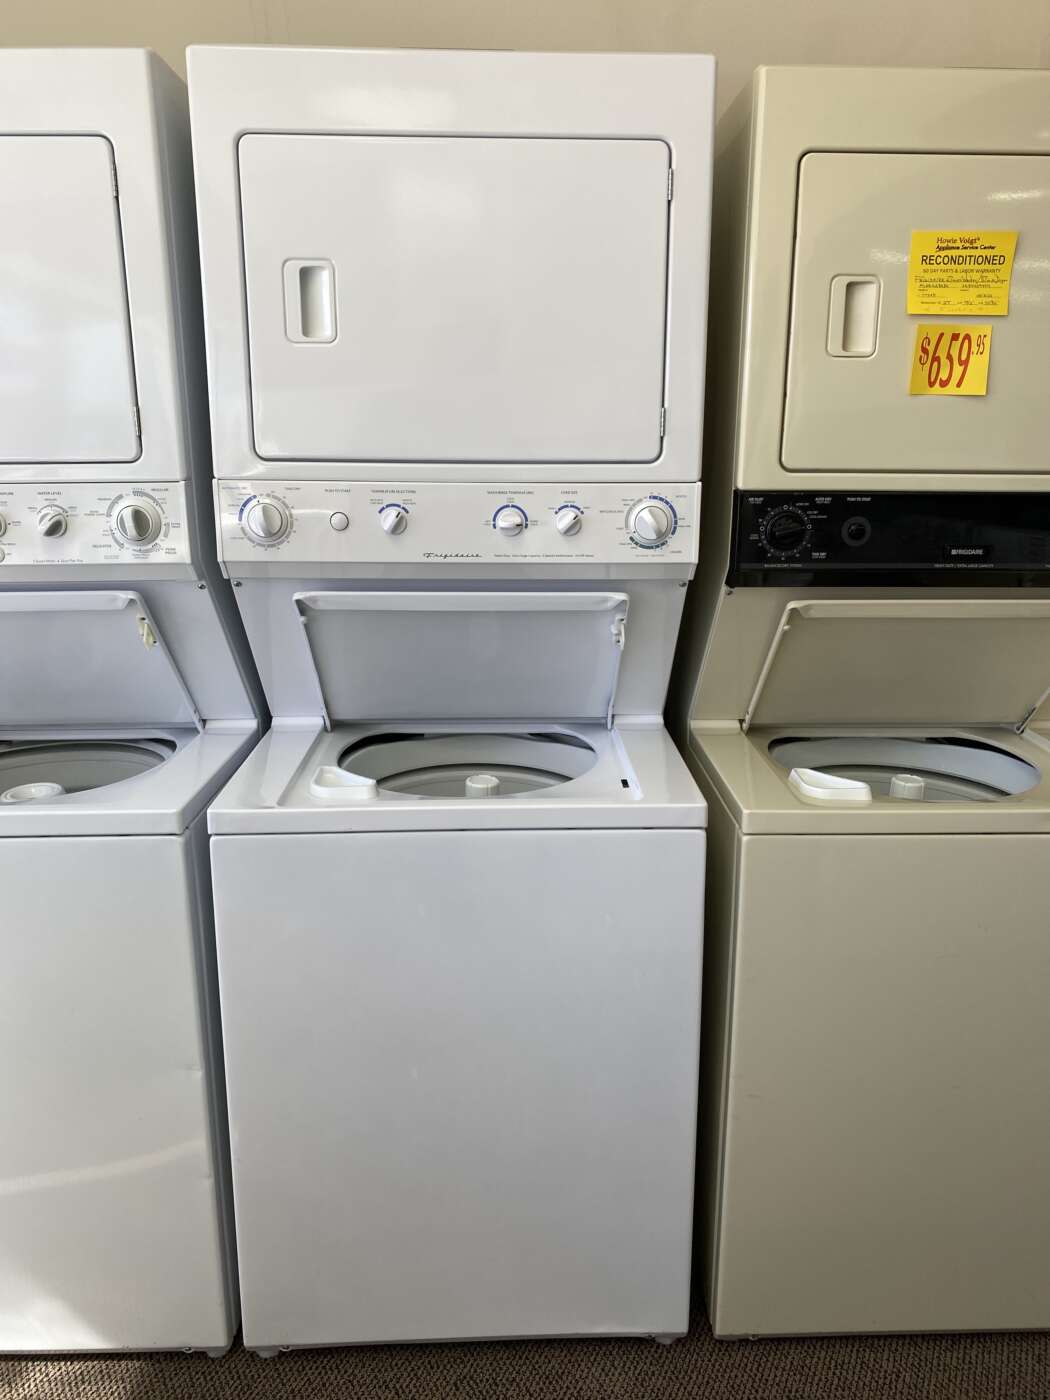 Reconditioned FRIGIDAIRE 2.7 Cu. Ft. Top-Load Washer & 5.7 Cu. Ft. Electric Dryer – White